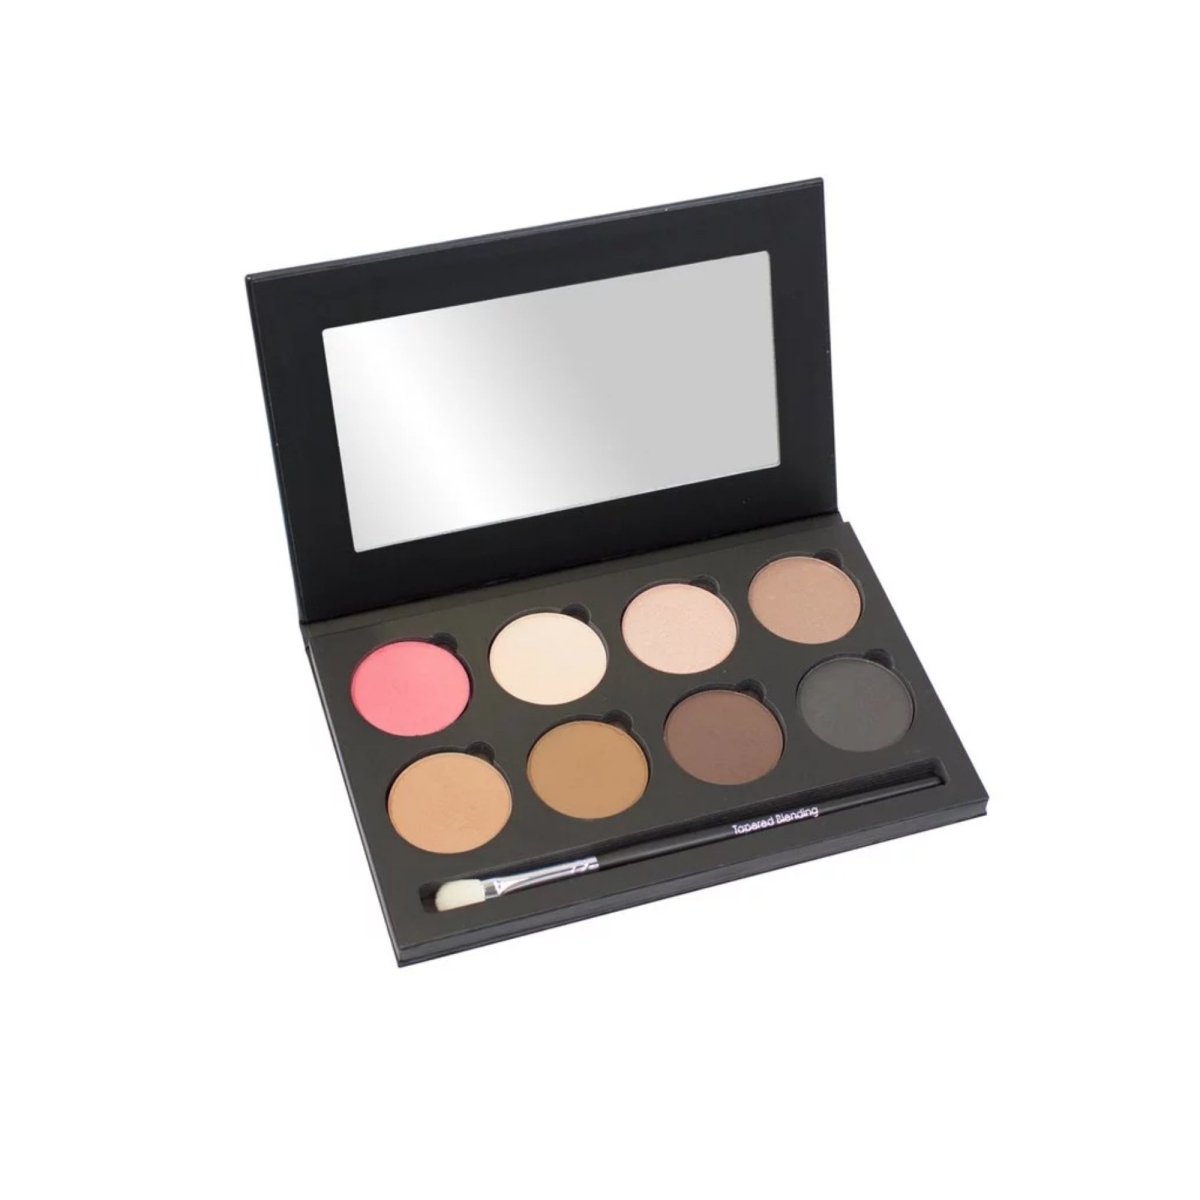 Perfect Palette - Bodyography Canada